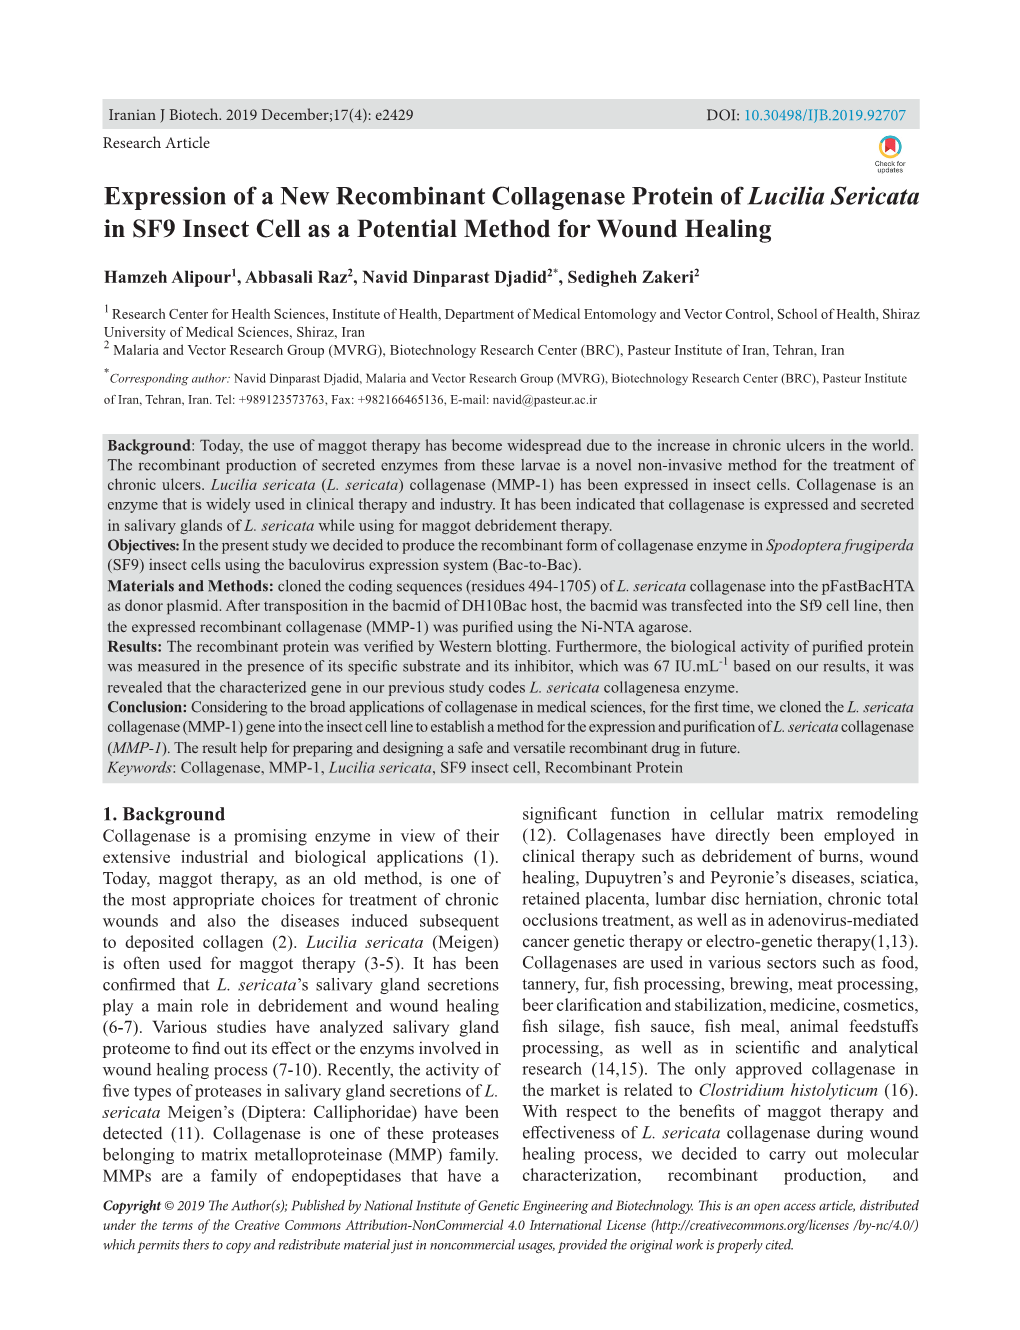 Expression of a New Recombinant Collagenase Protein of Lucilia Sericata in SF9 Insect Cell As a Potential Method for Wound Healing